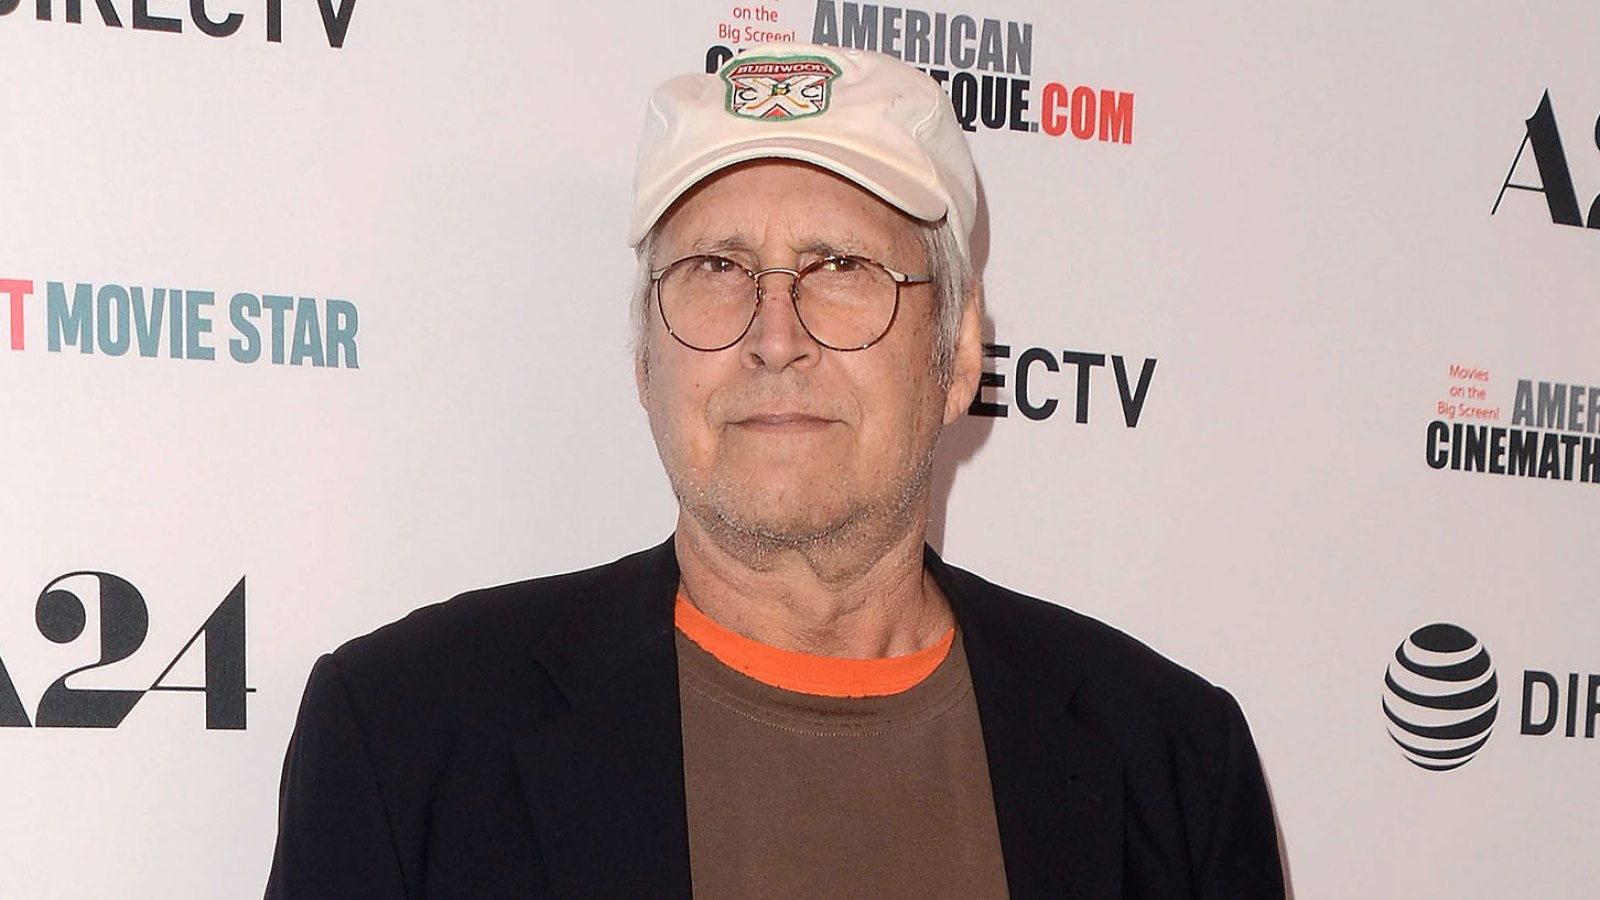 Chevy Chase Reacts to Reports He's Difficult to Work With